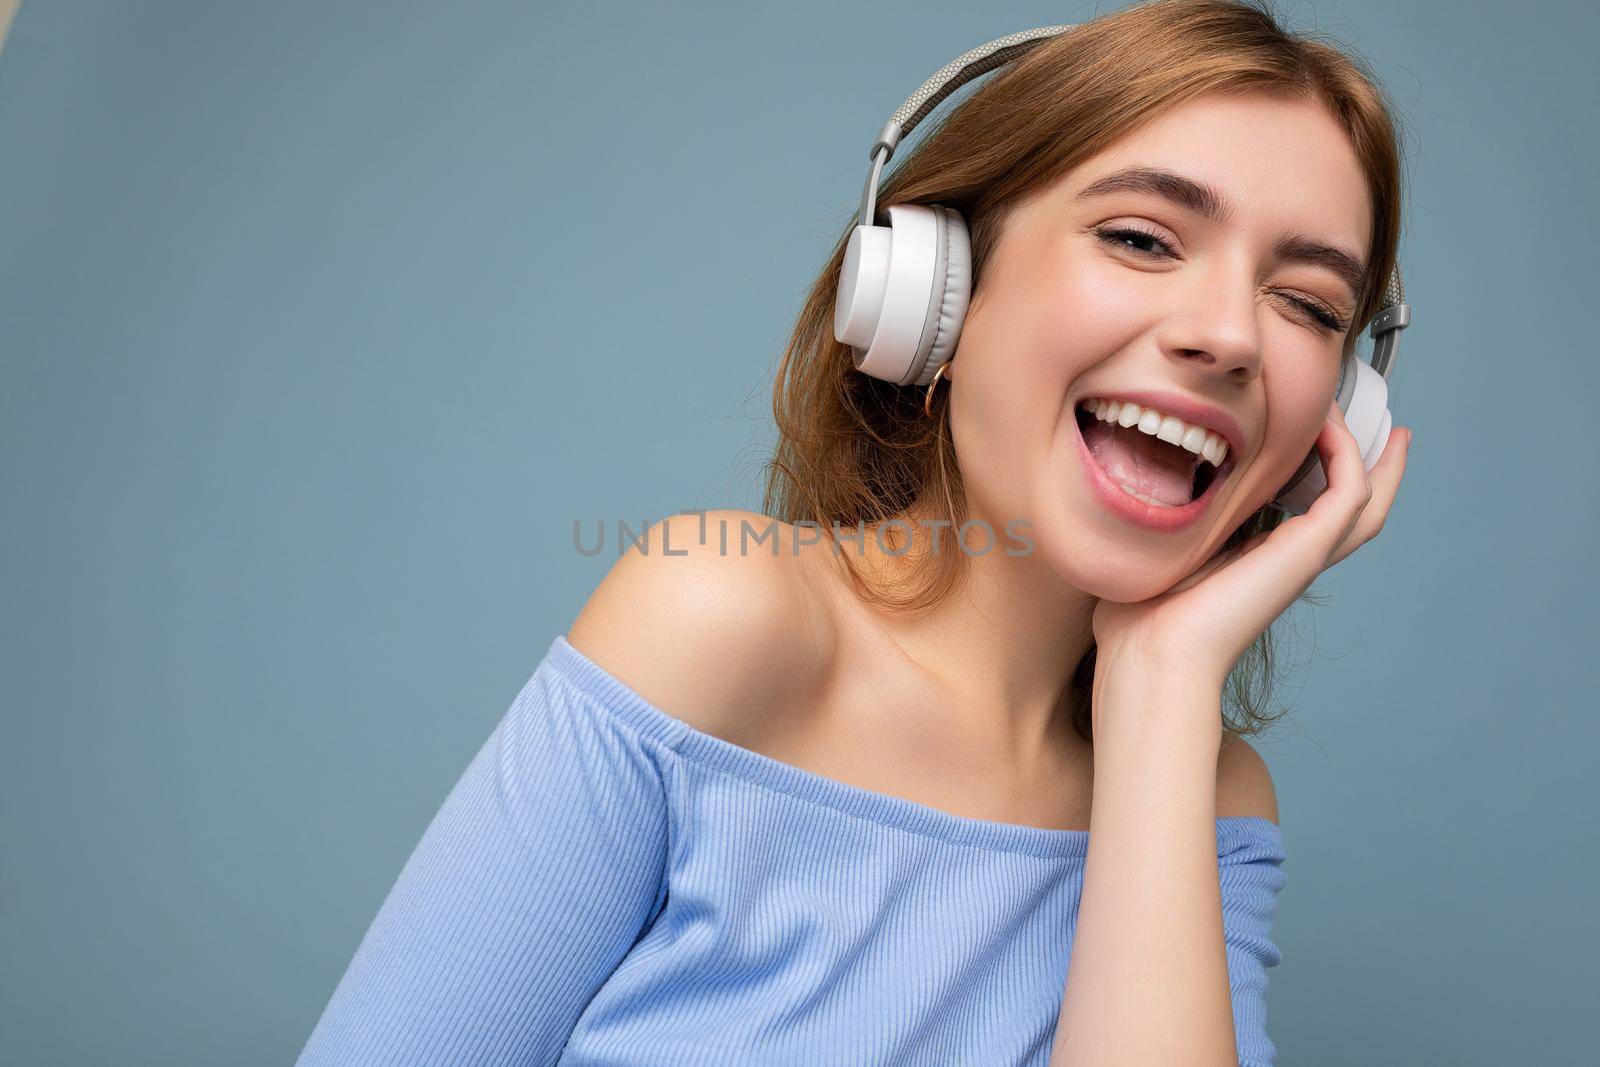 Closeup photo of attractive happy smiling young blonde woman wearing blue crop top isolated over blue background wall wearing headphones listening to music and having fun.